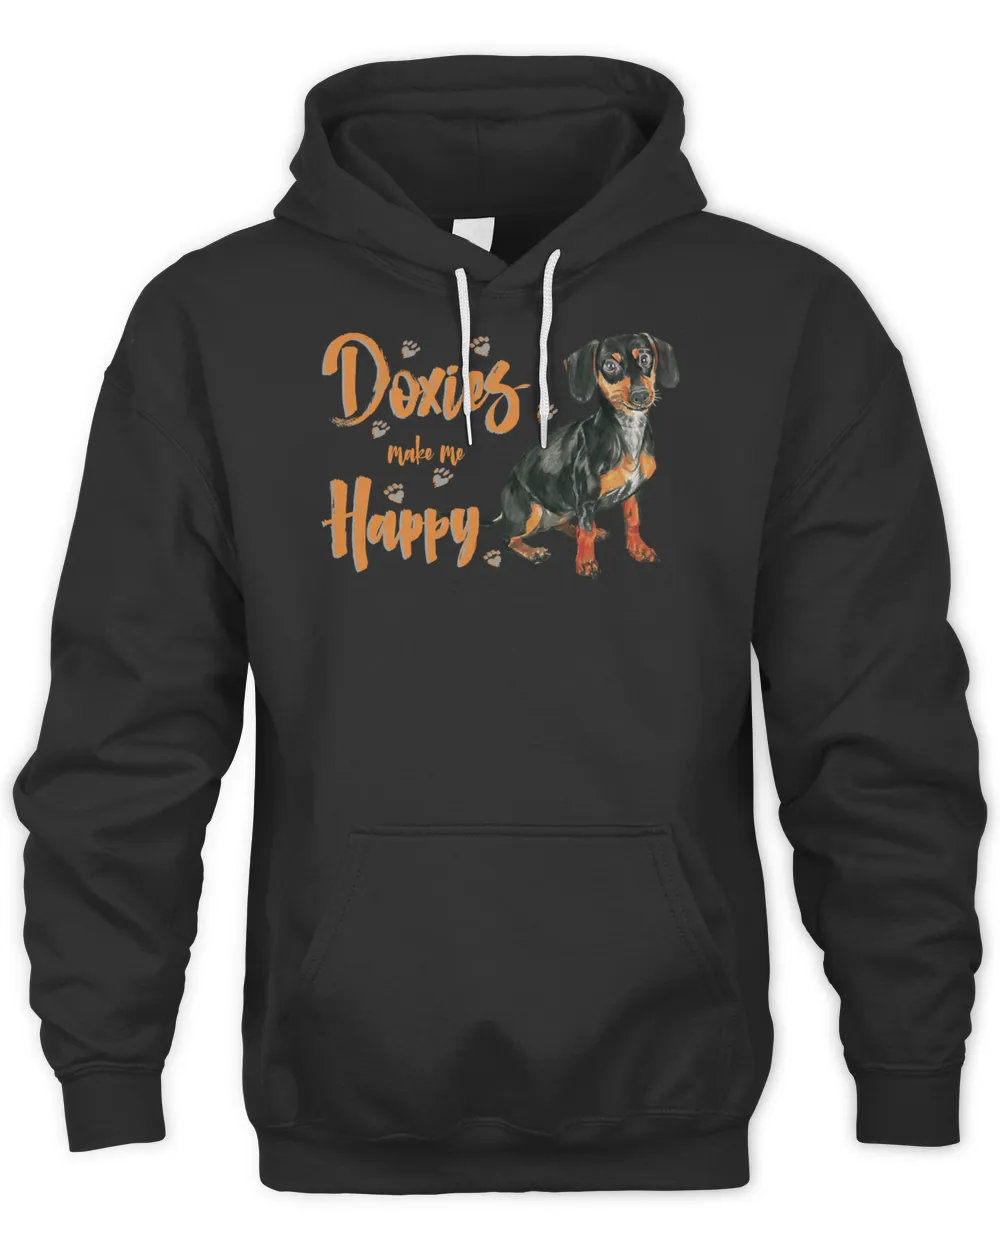 Dog Doxies make me Happy Especially for Doxie owners dog lover